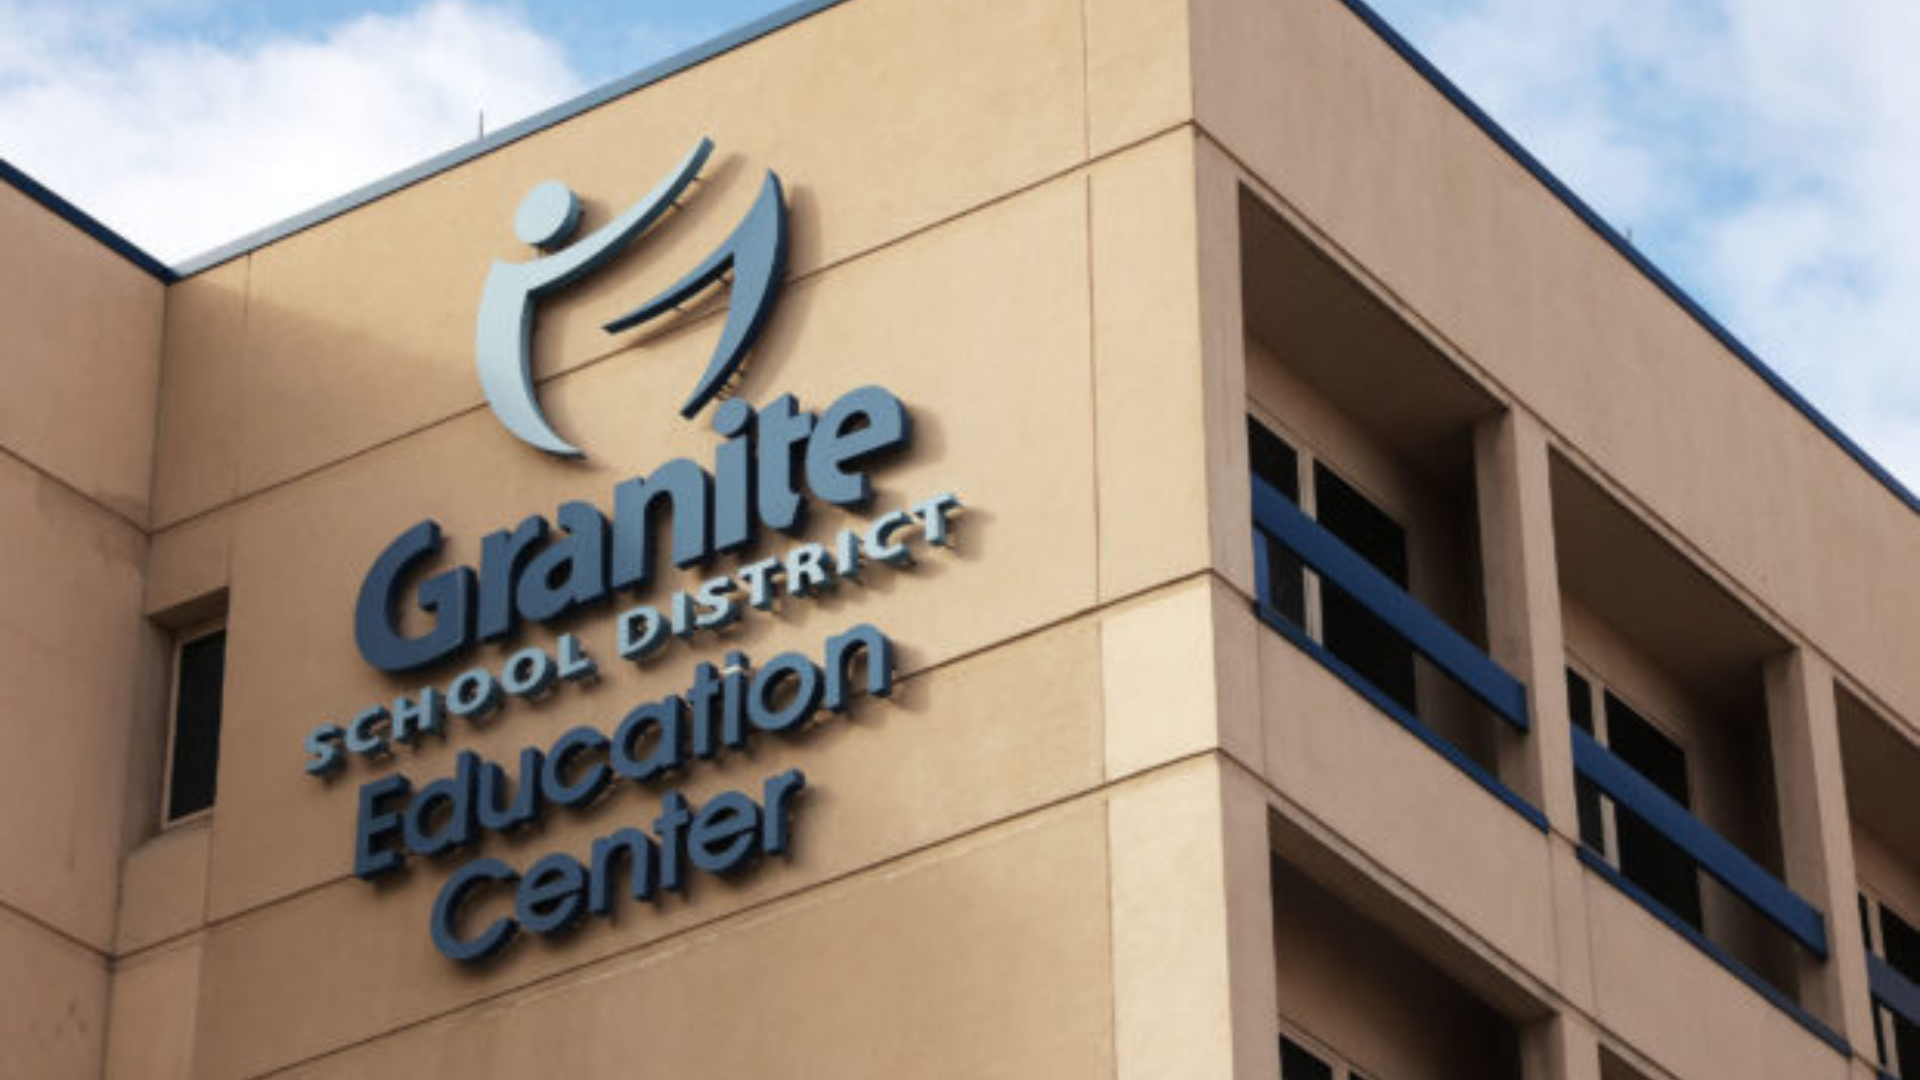 FILE: Granite School District offices are pictured in Salt Lake City on Wednesday, Jan. 13, 2021. ...